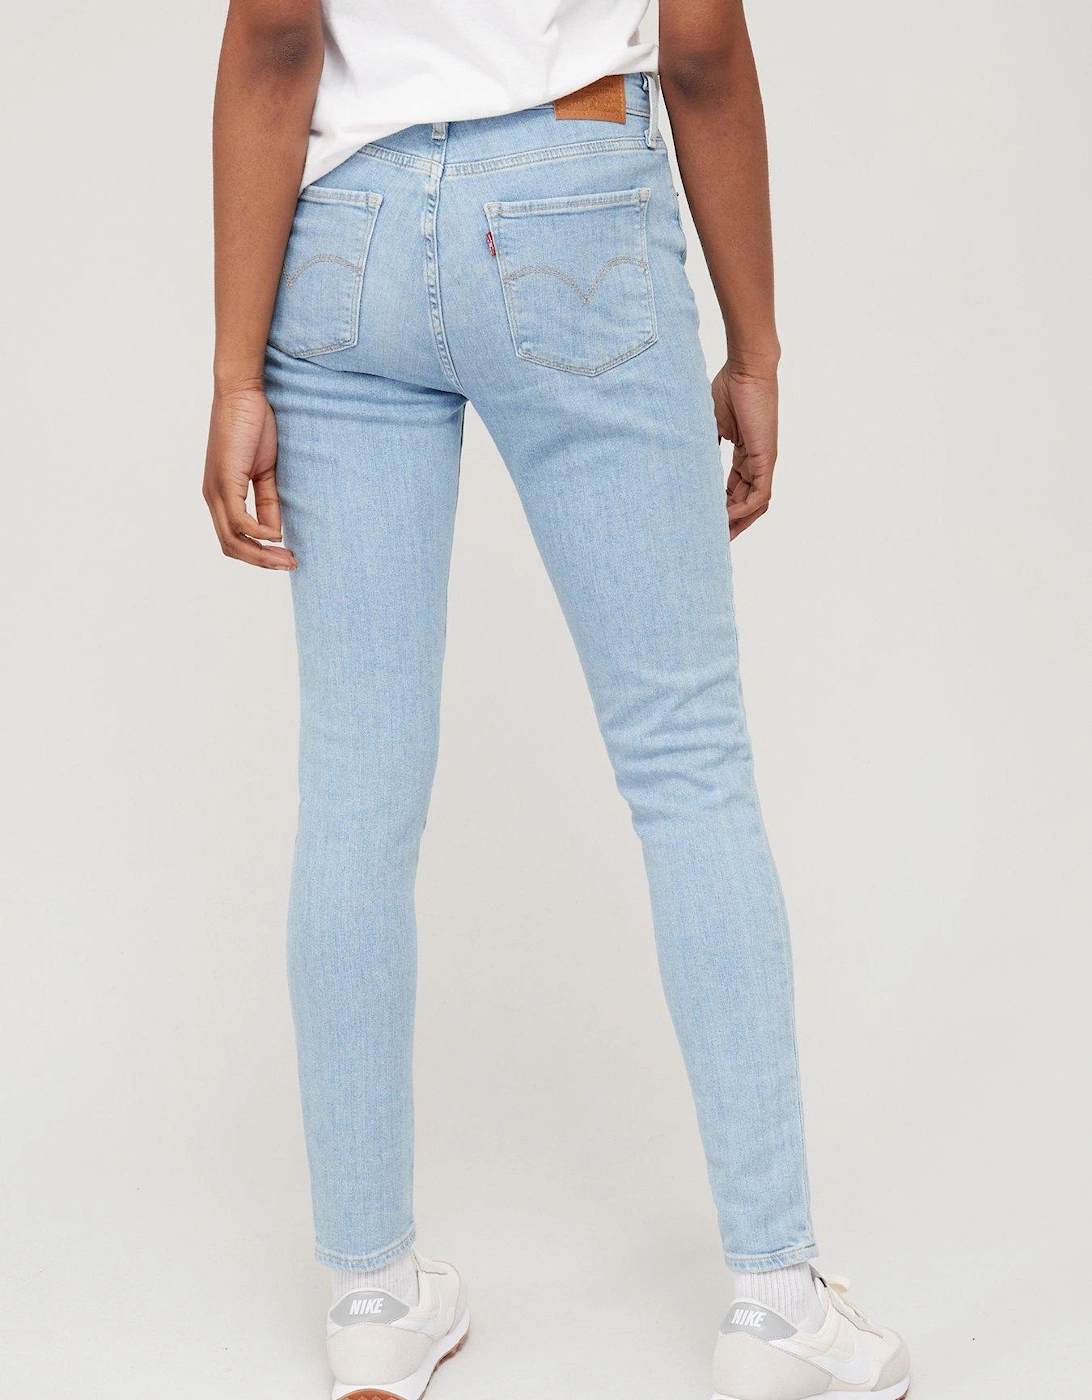 721 High Rise Skinny Jean - Snatched - Blue